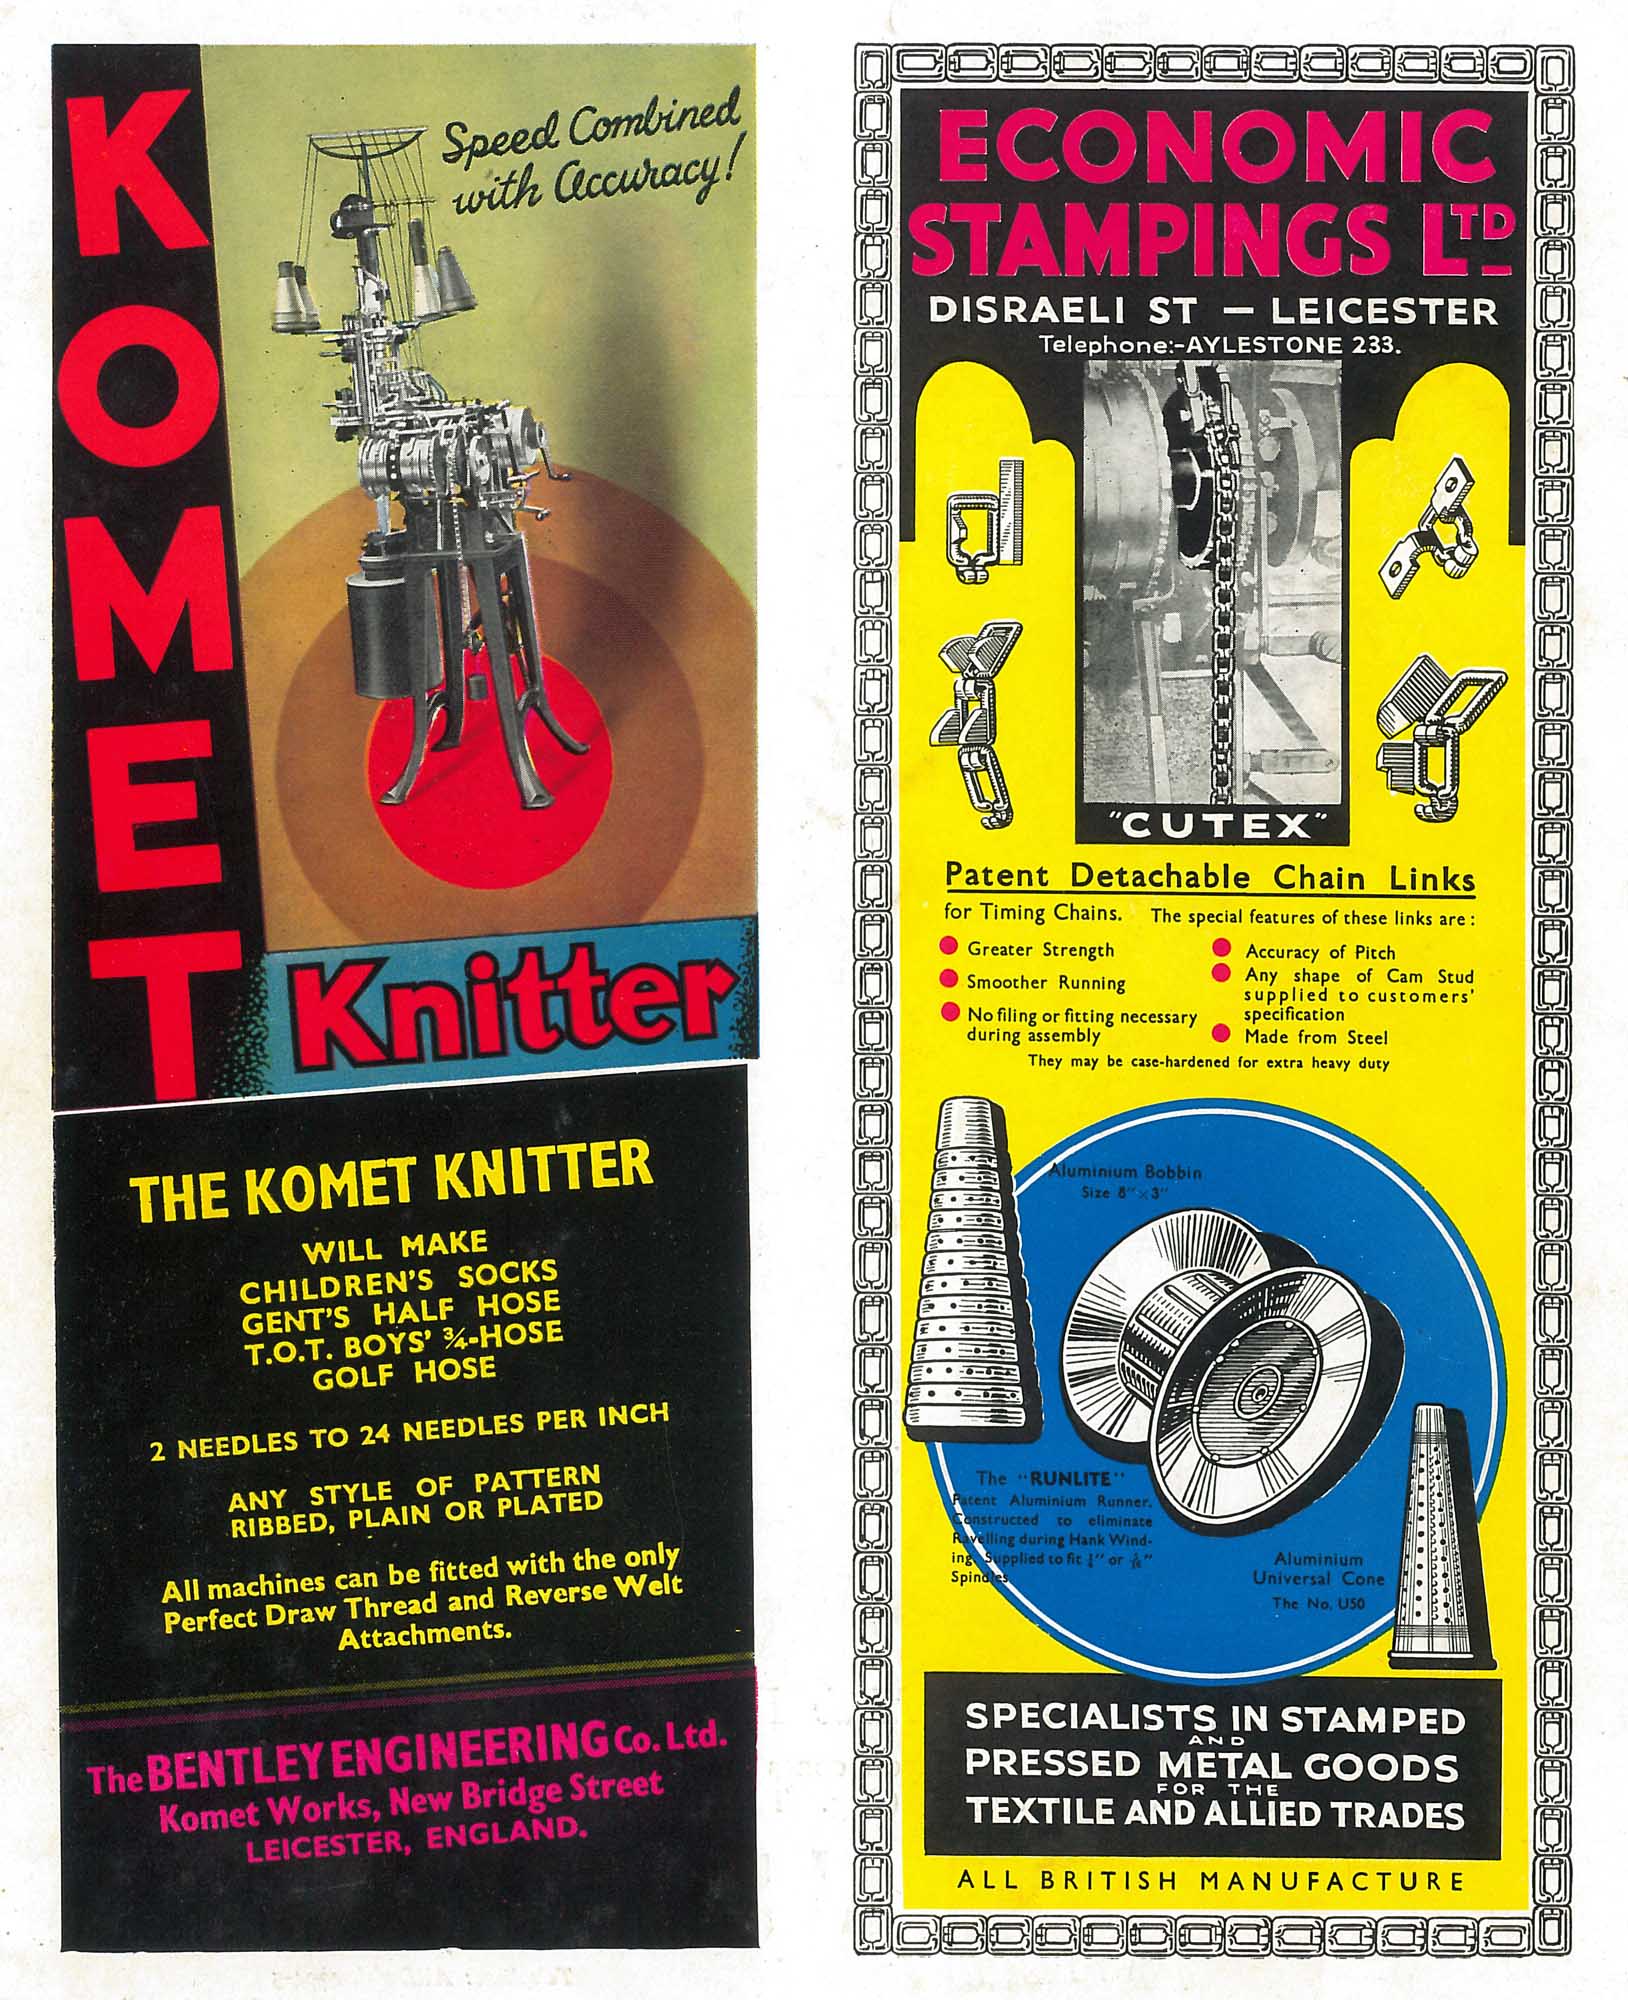 1938 adverts for Leicester based engineering companies, including a Komet knitting machine - 